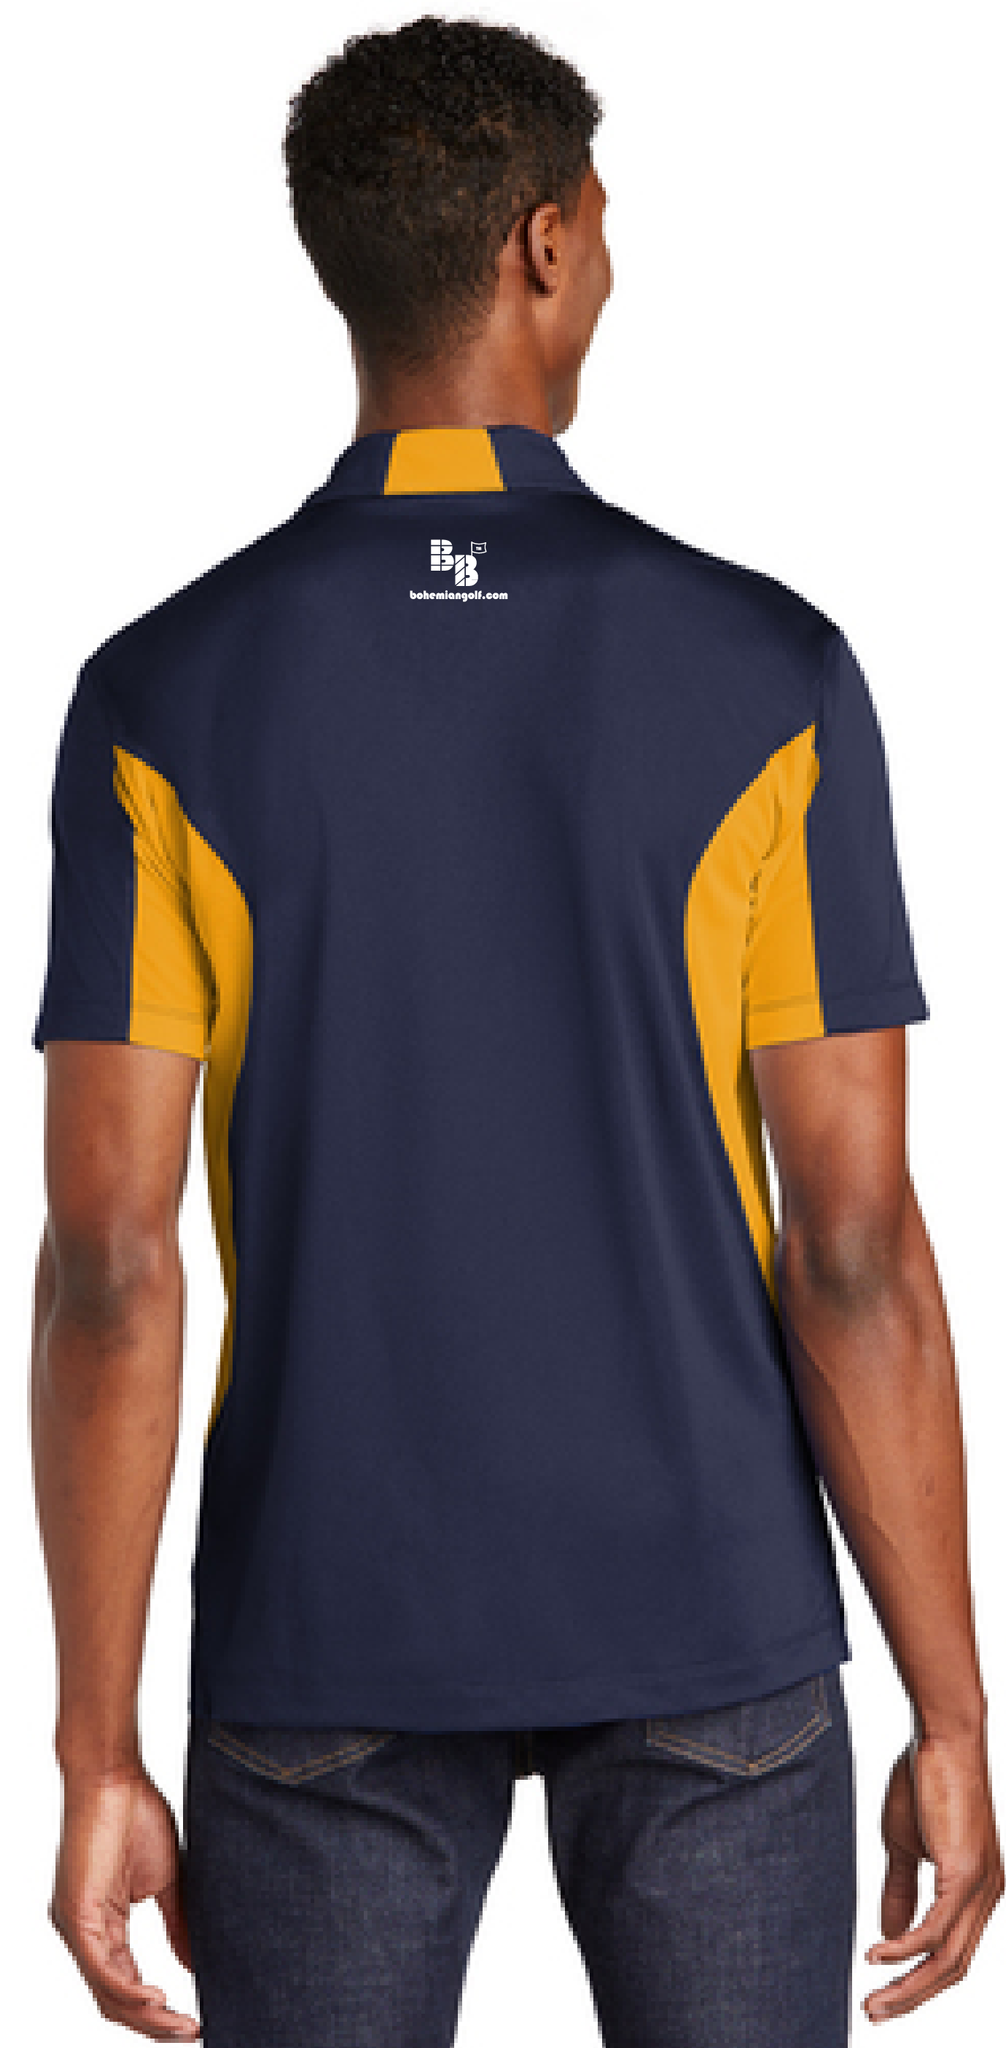 Yellow Gold Polyester Athletic Wicking Jersey Fabric